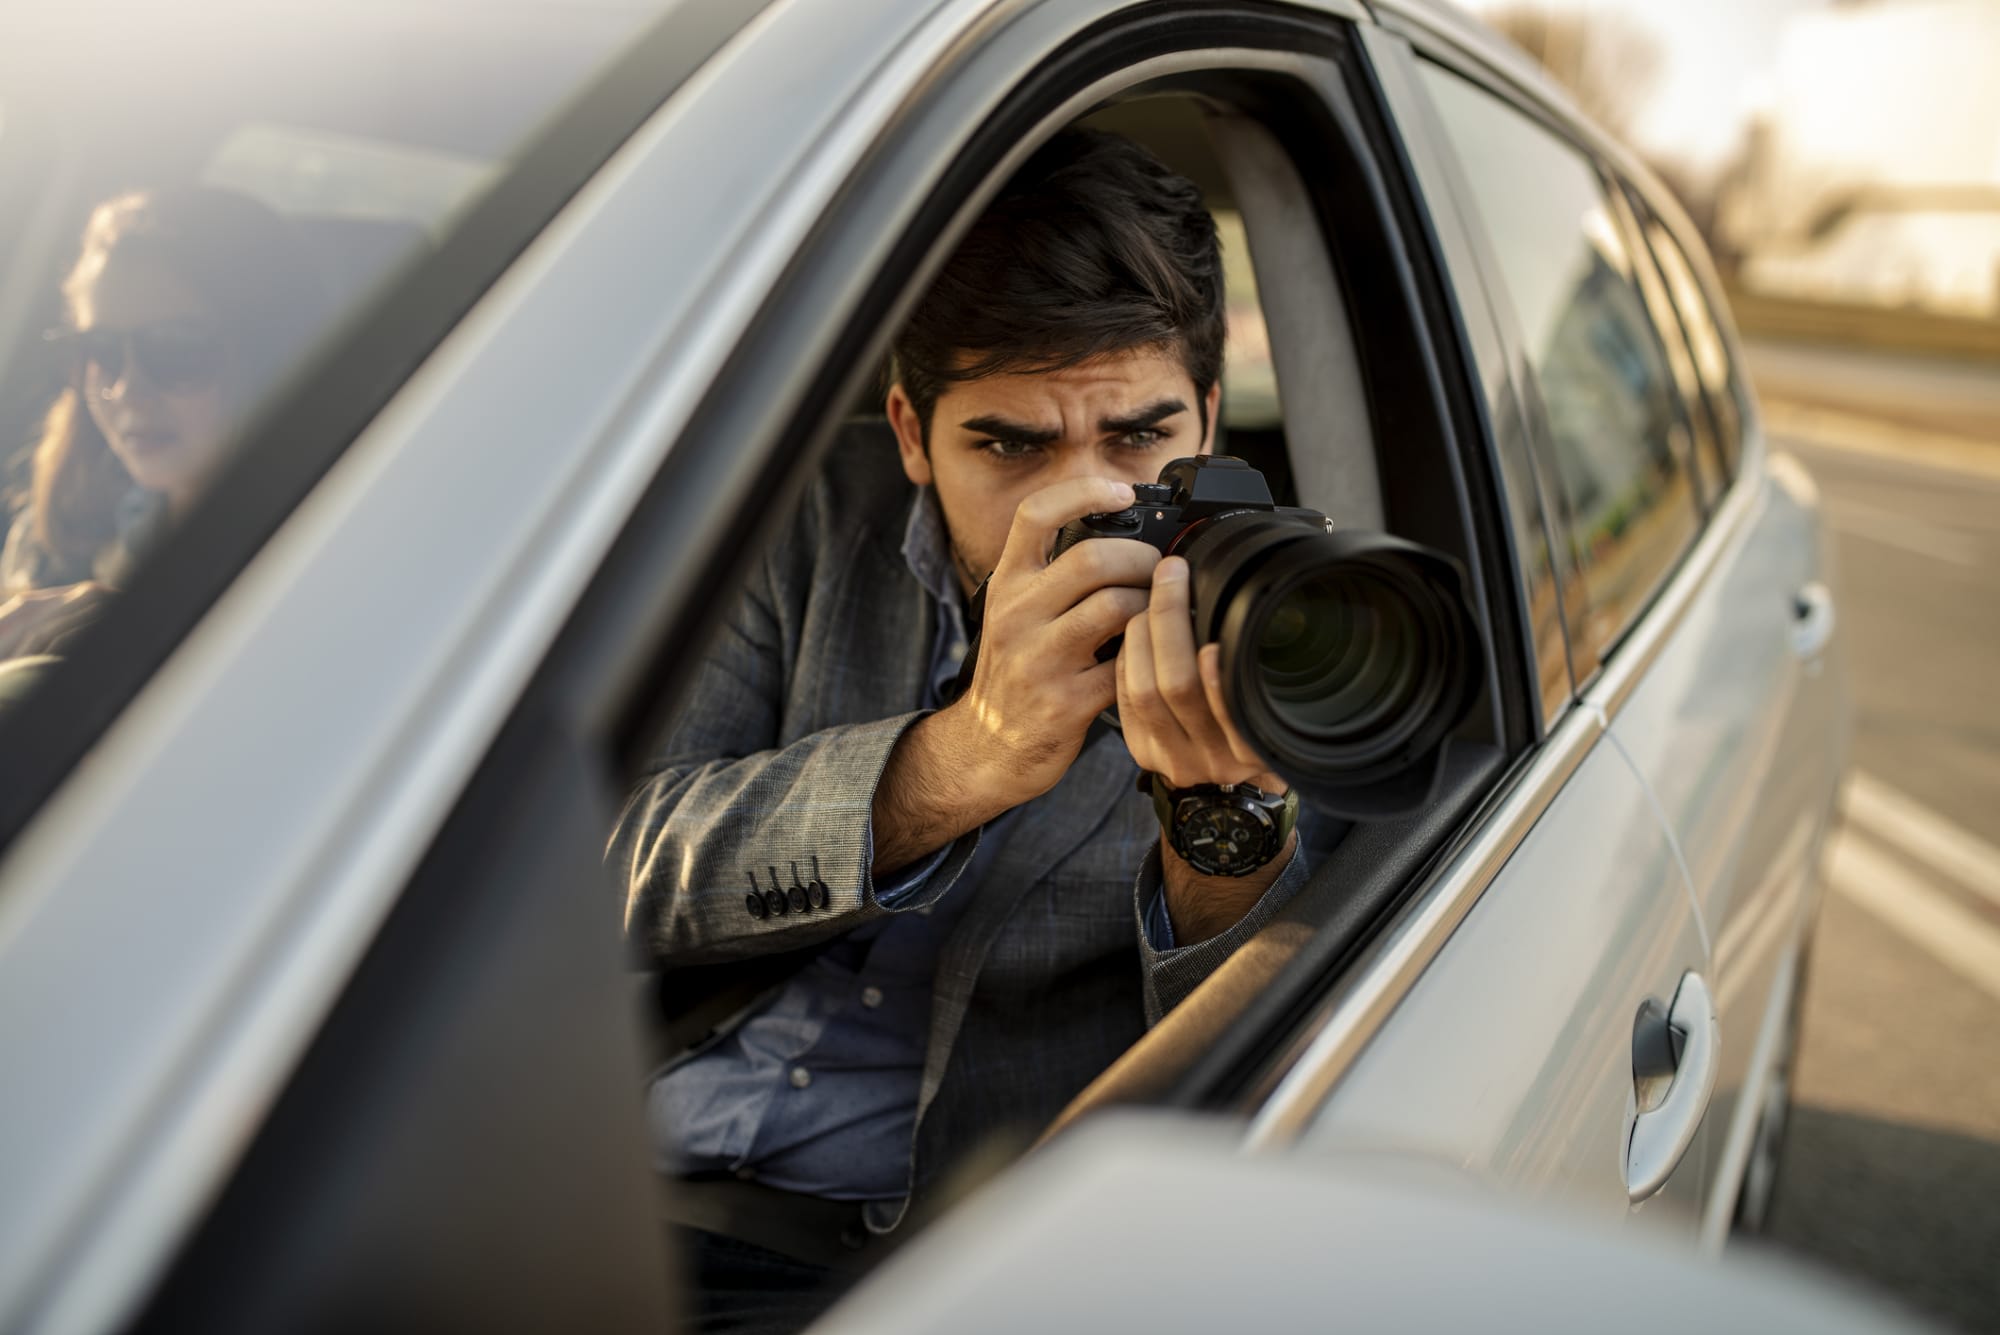 Man taking photographs out of a car window